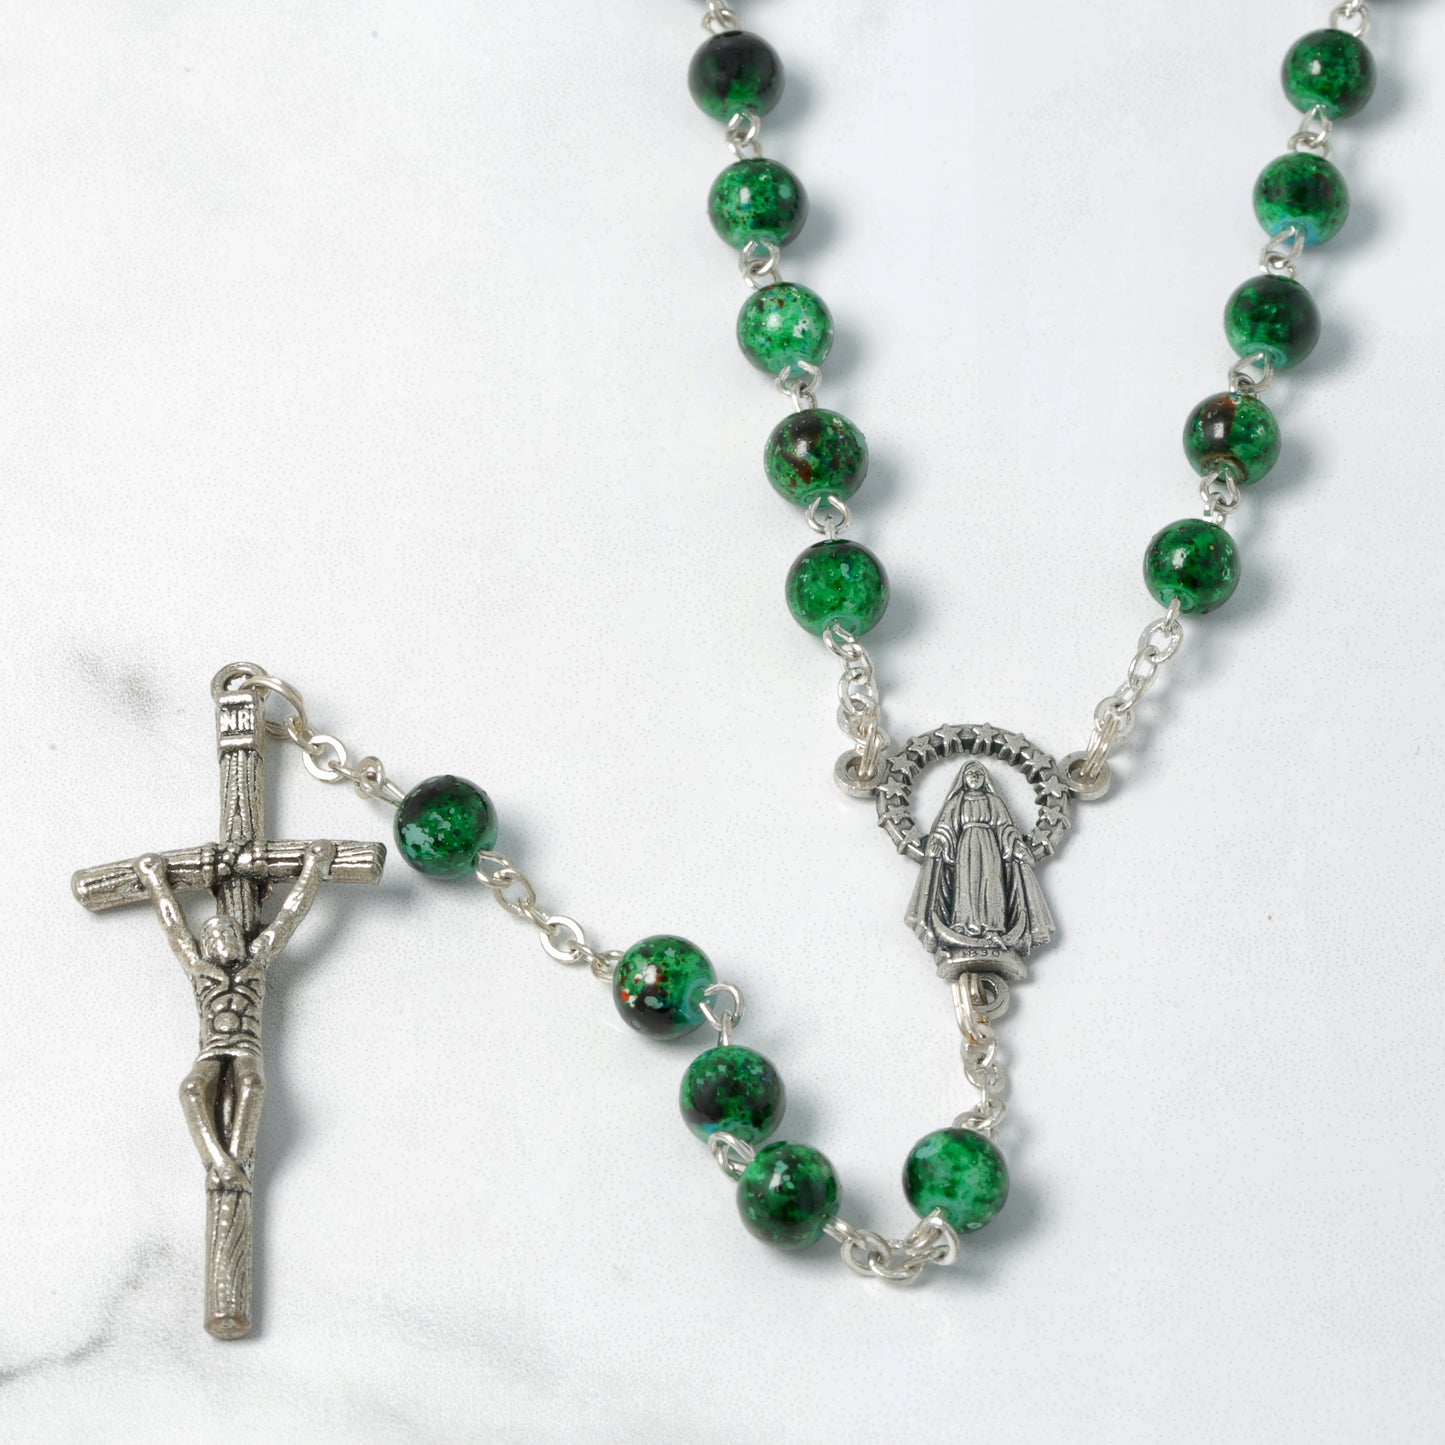 Green Ceramic Rosary 6mm Souvenirs from Italy